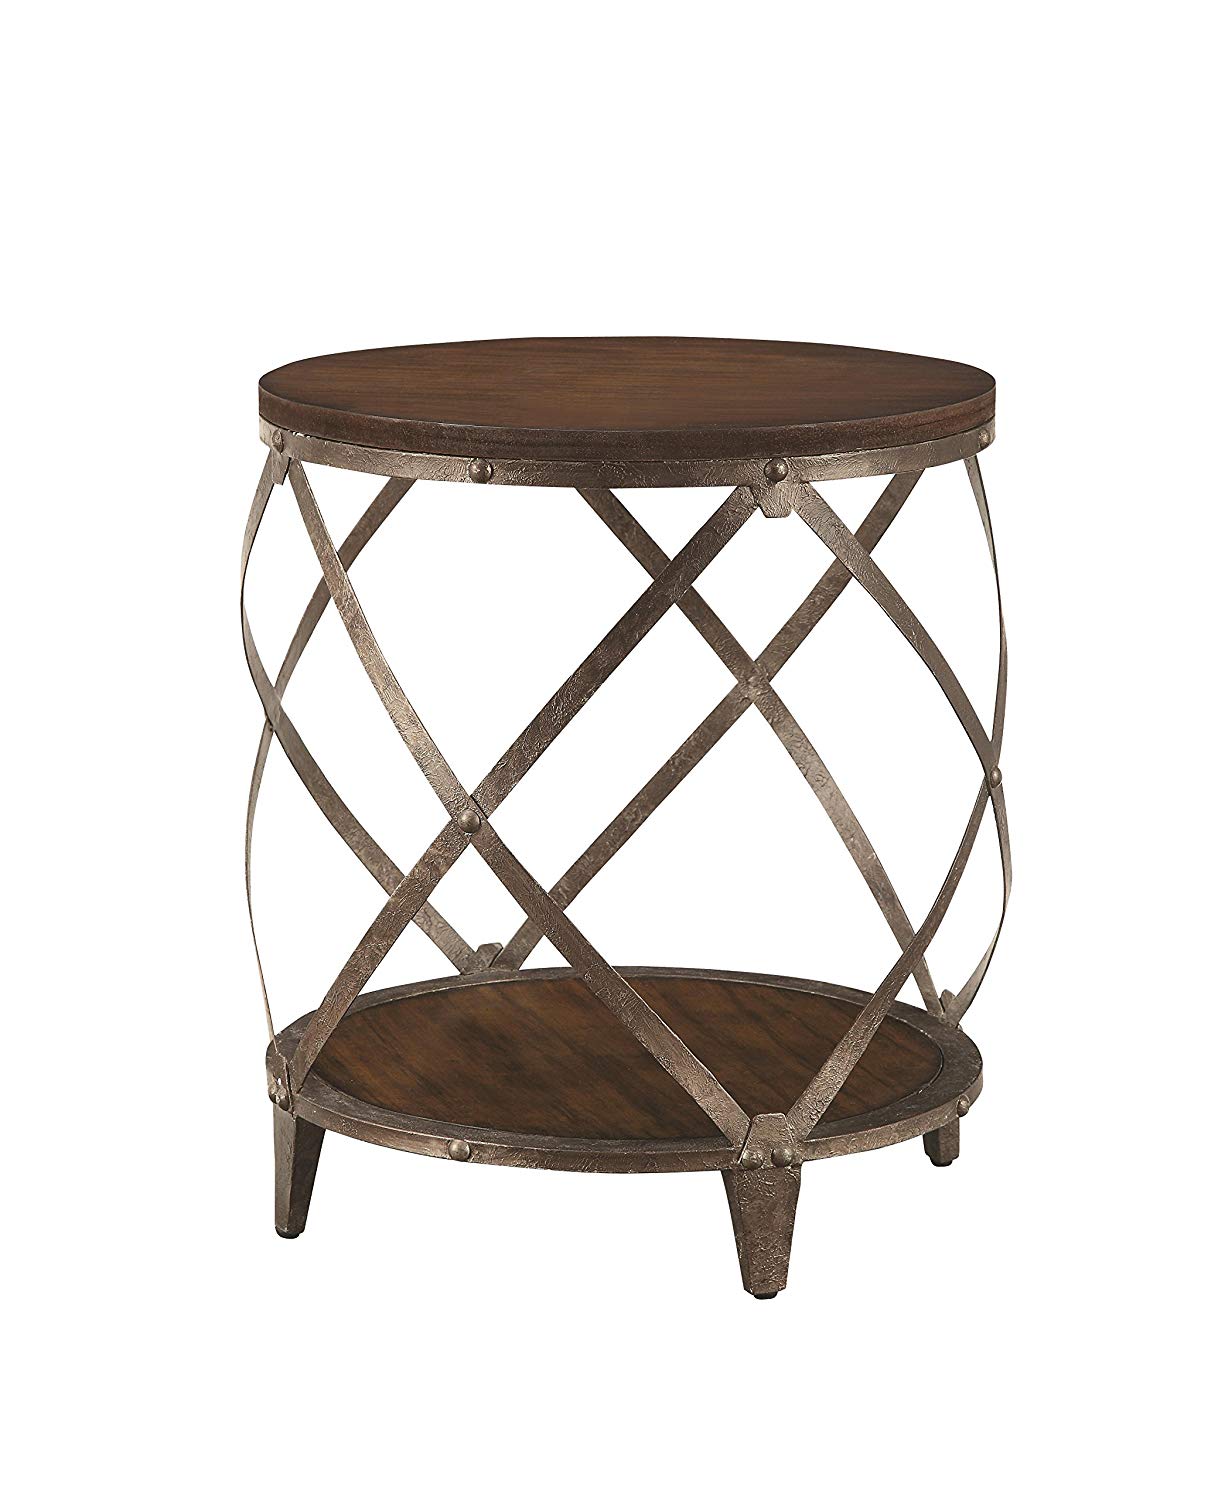 metal accent table with drum shape brown kitchen dining tables furniture and wood entry room essentials storage tall mirrored side cordless battery lamp colorful nesting dresser